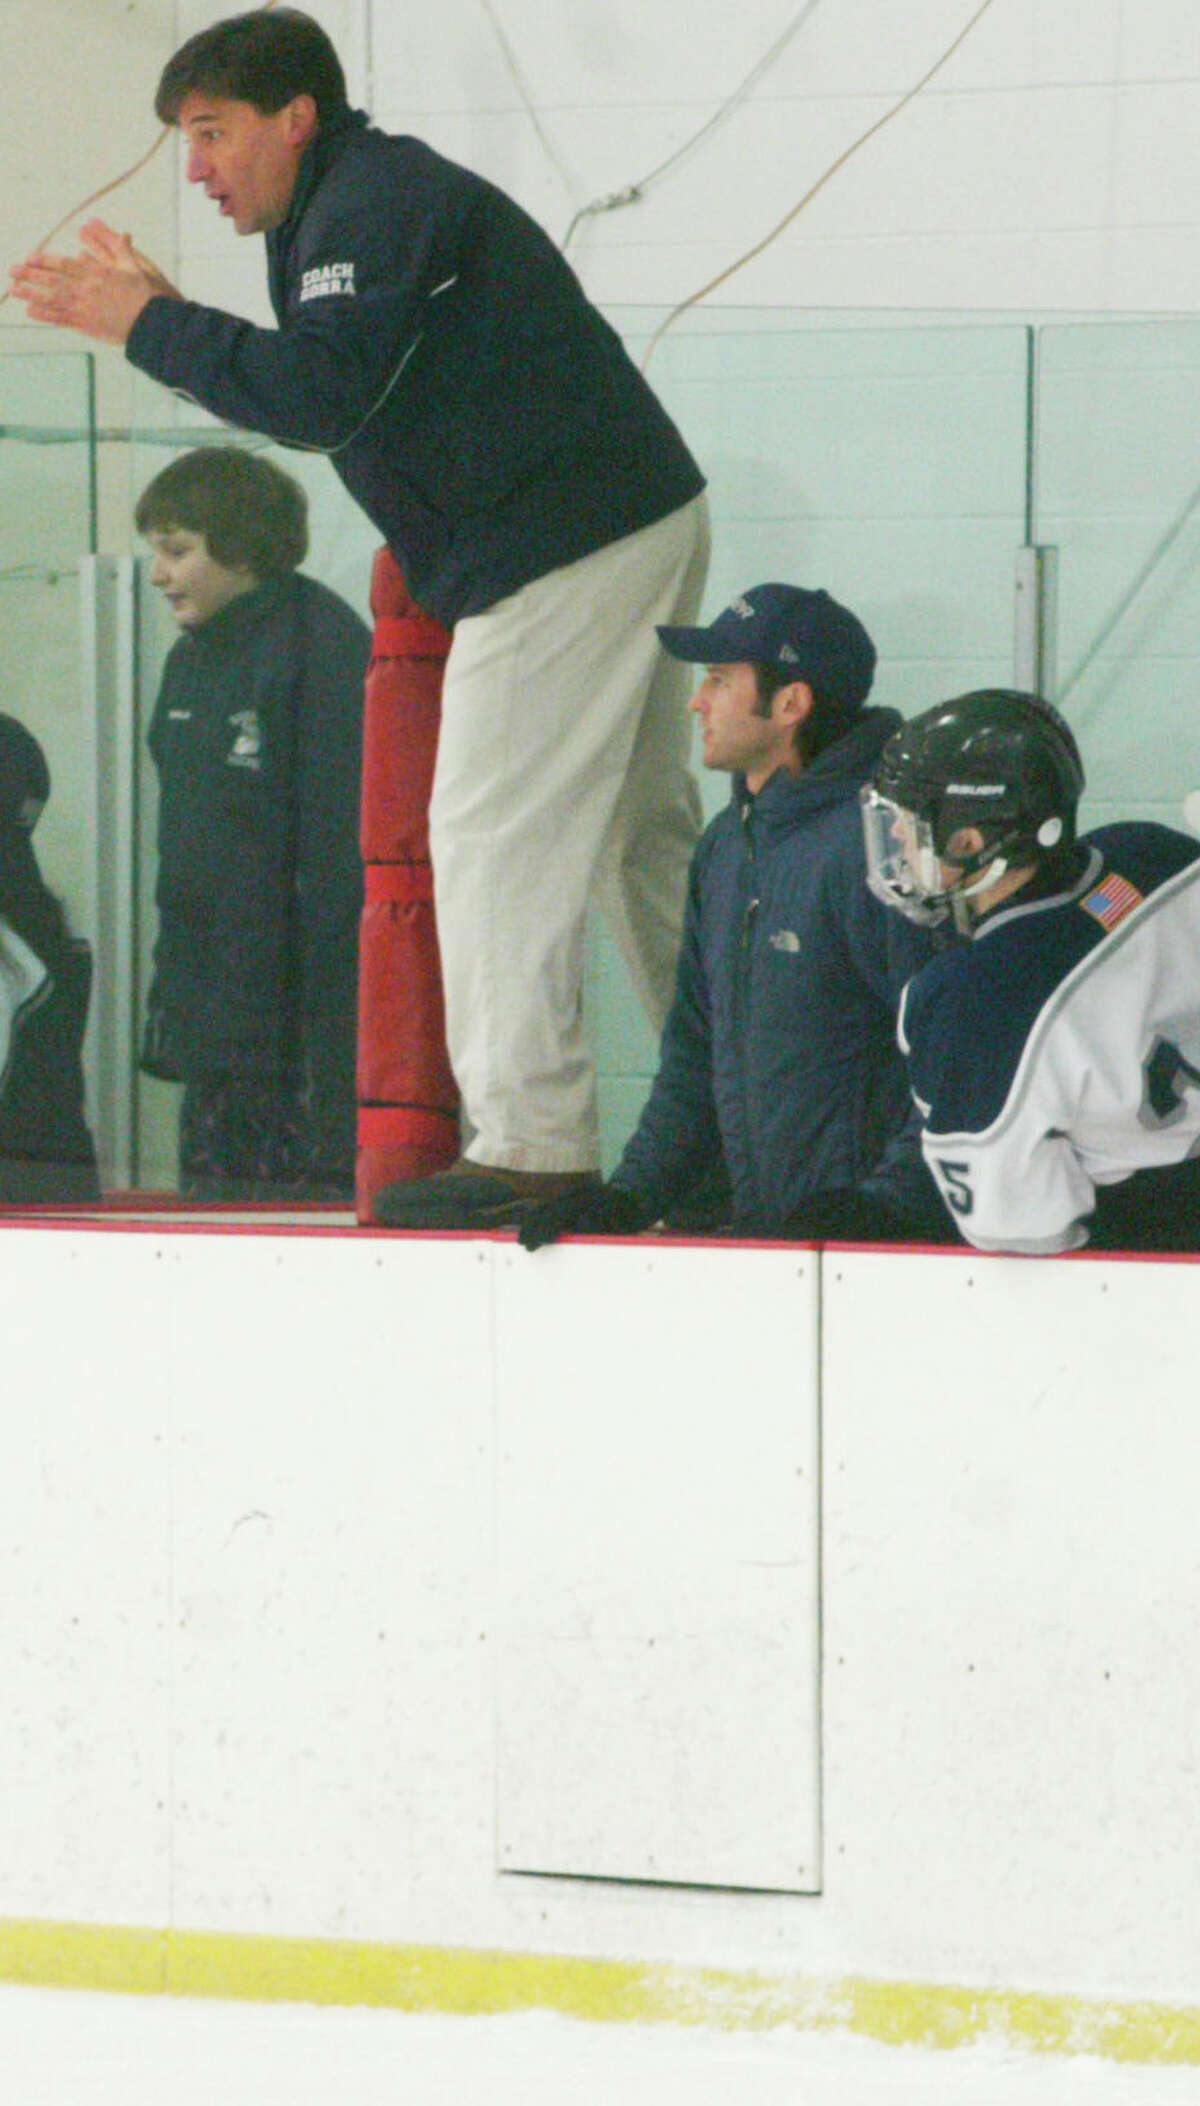 Spartan coach Michael Gorra all but checks himself into the match as the action heats up during Shepaug Valley/Litchfield/Nonnewaug ice hockey's Senior Night defeat to arch-rival Housatonic Valley/Northwestern/Wamogo at The Gunnery in Washington, Feb. 24, 2014.